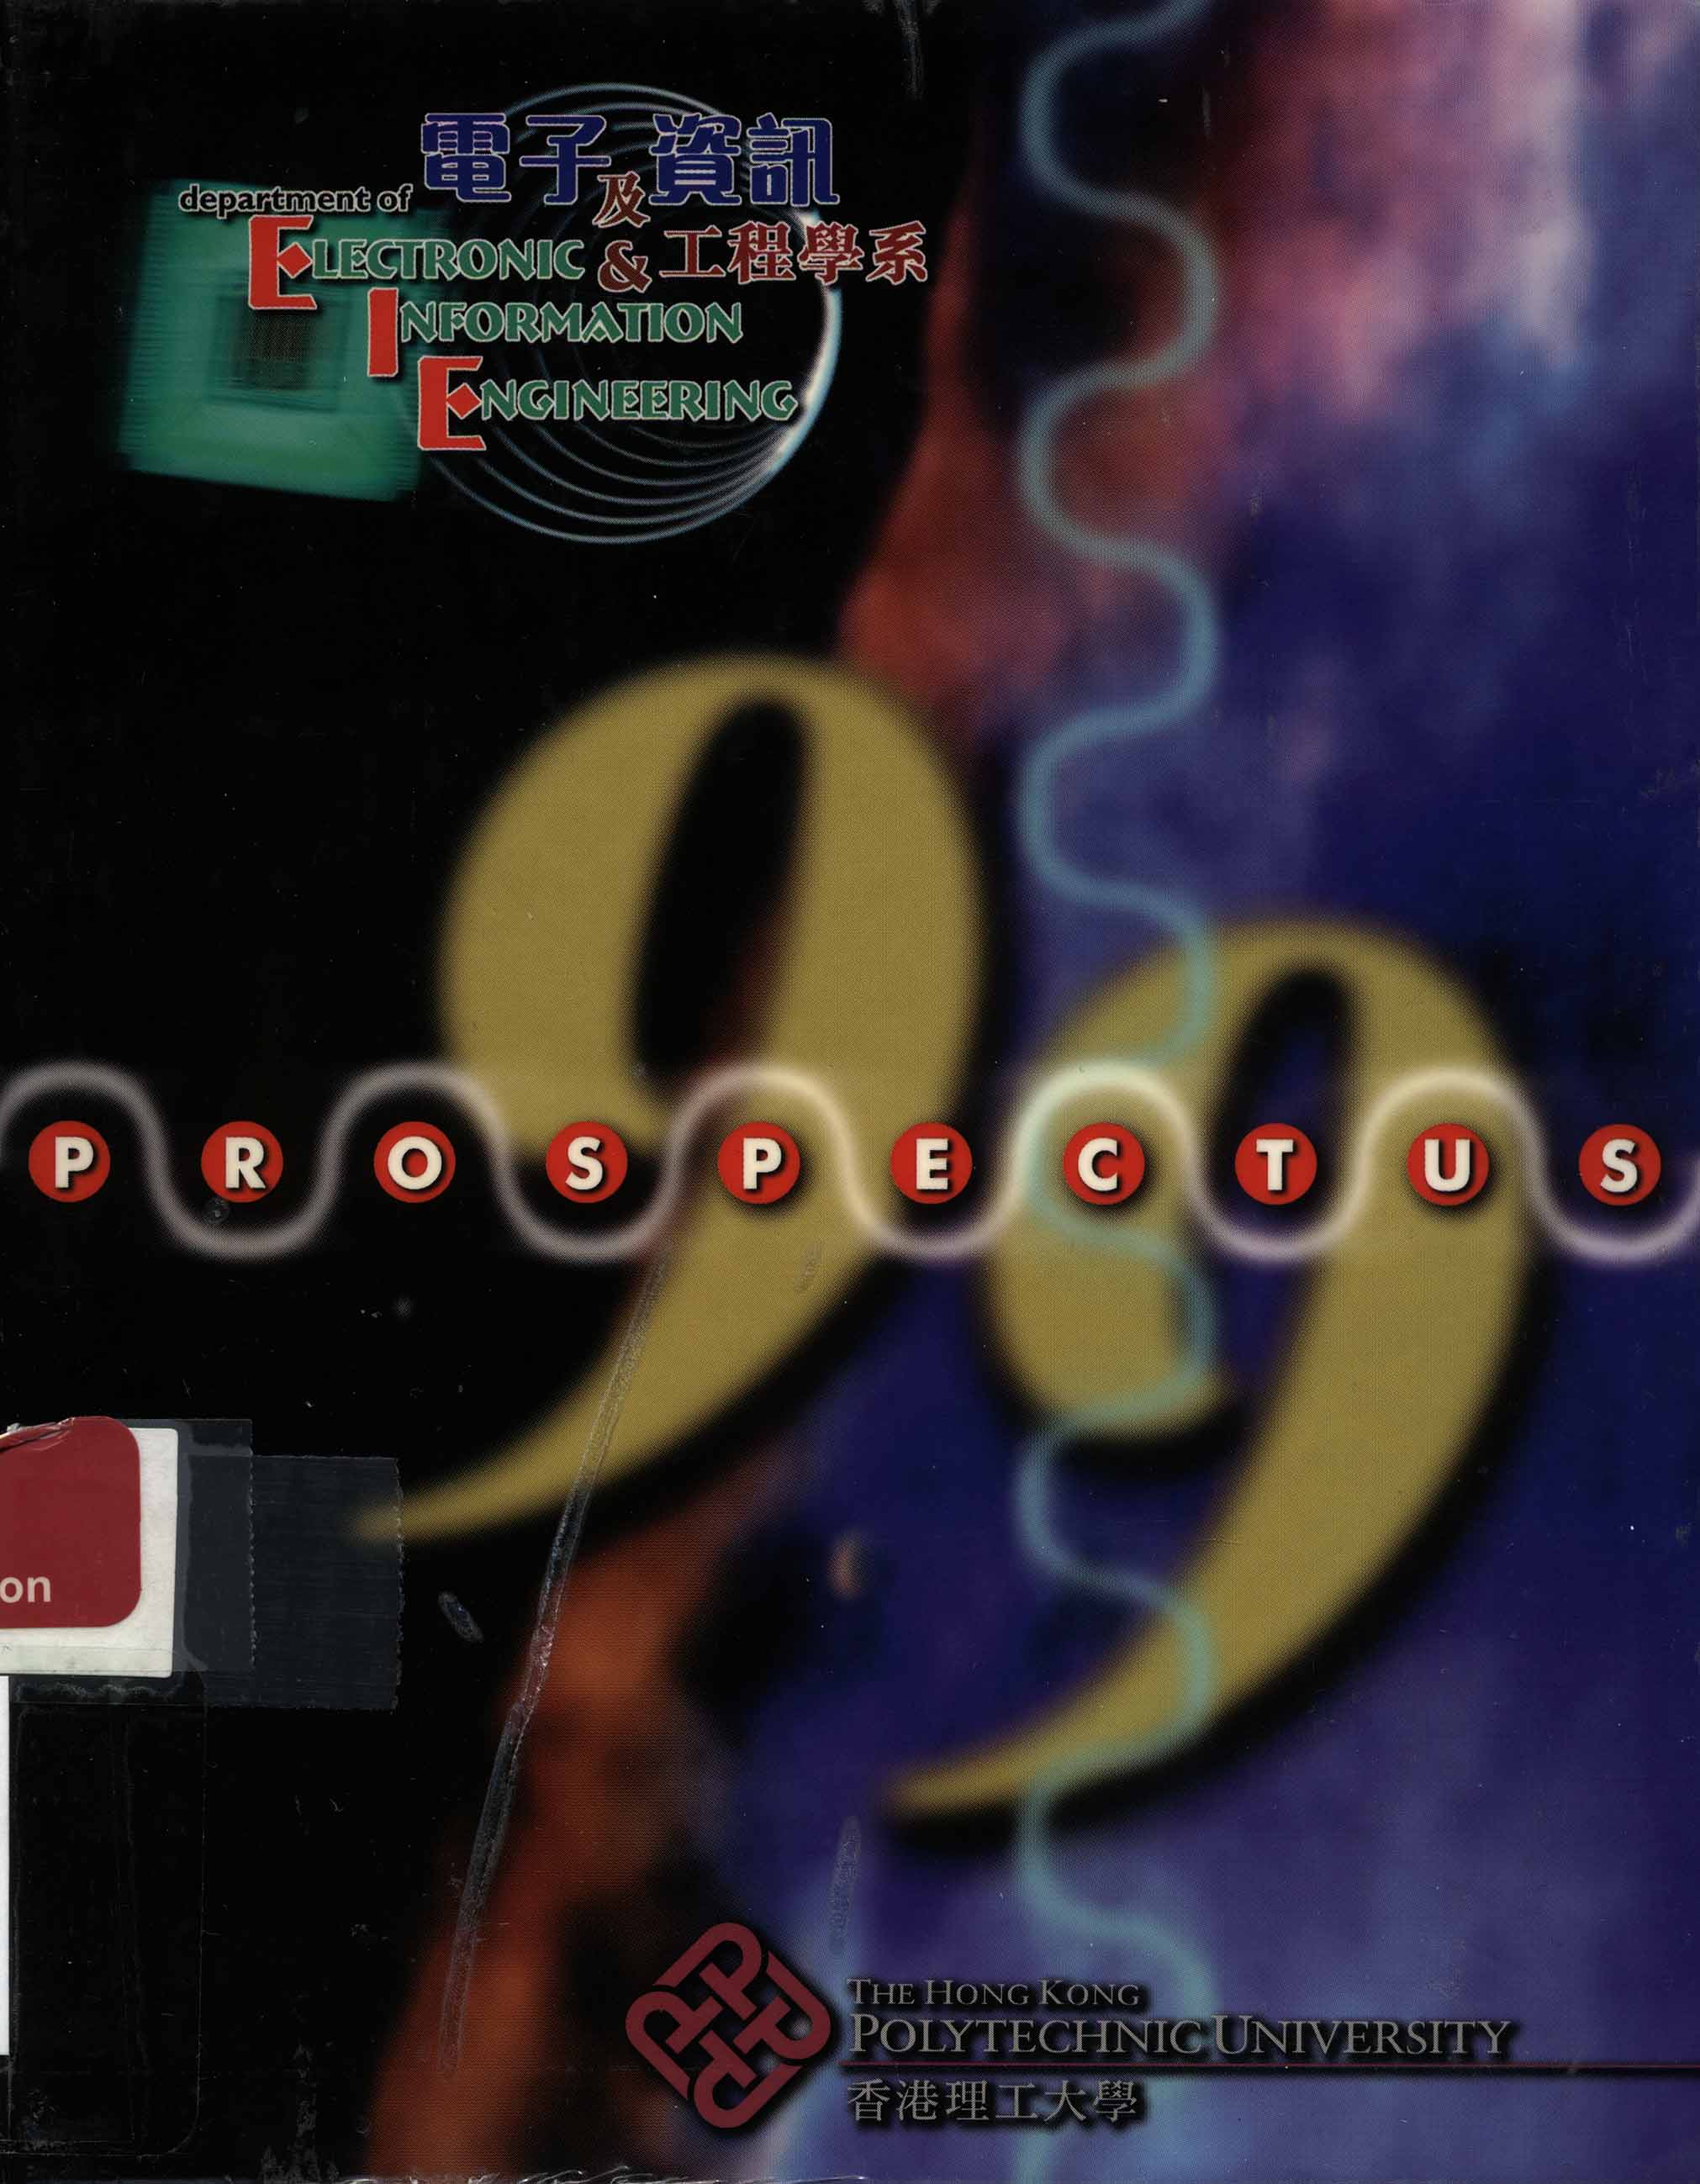 Prospectus 99 (Dept. of Electronic and Information Engineering)